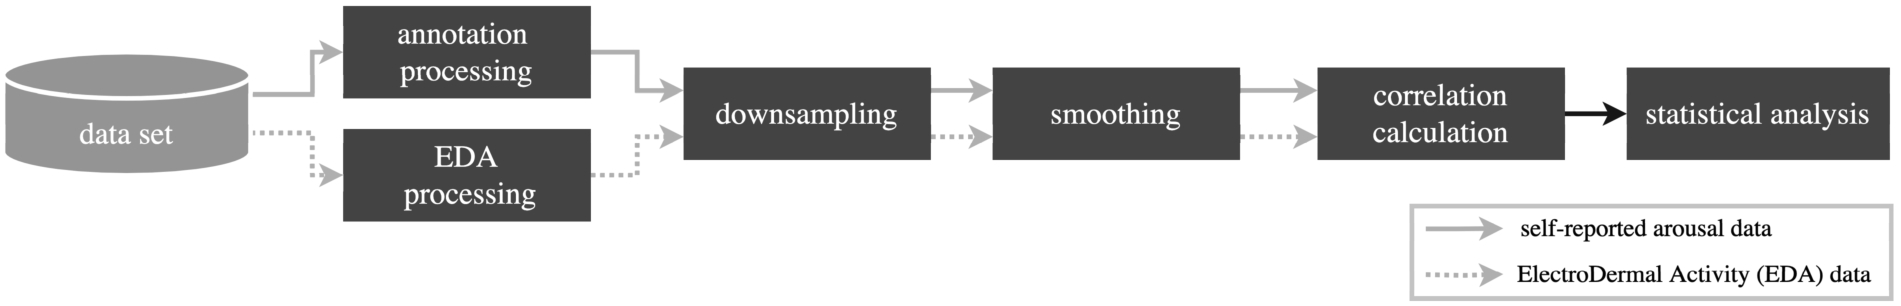 The processing pipeline for the 3 datasets. The processing of the annotation data and Electrodermal Activity (EDA) data is separated.